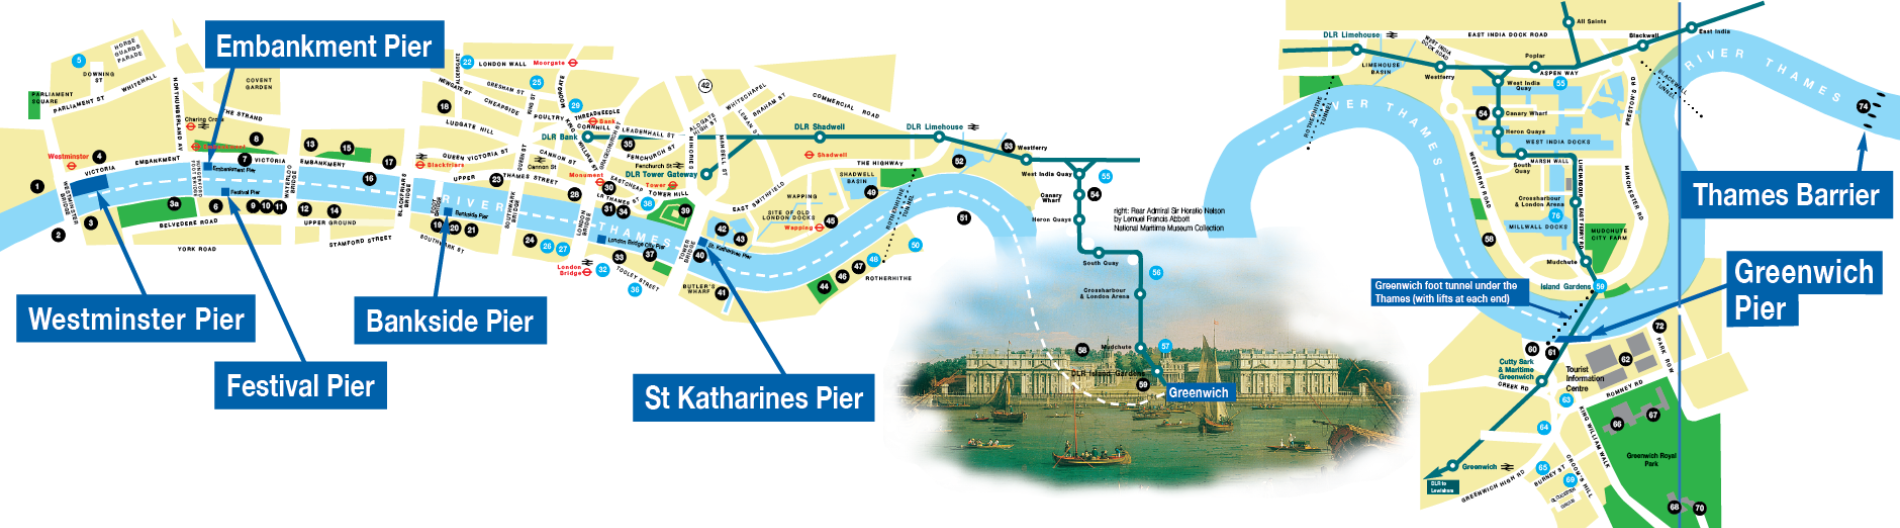 thames cruise route